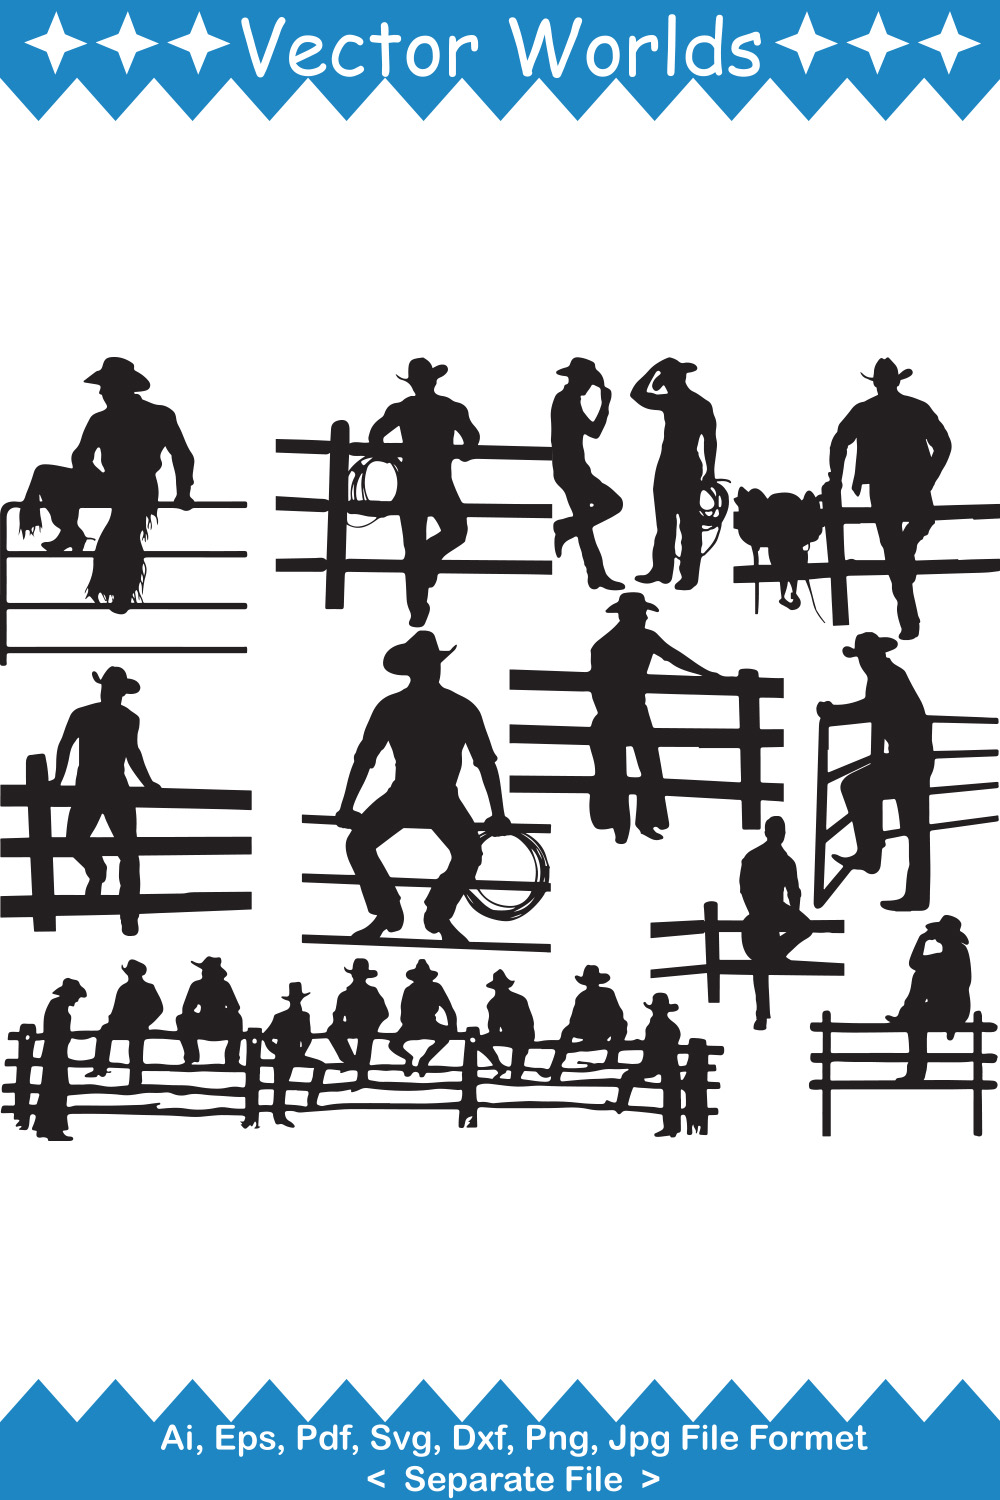 Collection of enchanting vector image of silhouettes of cowboys near the fence